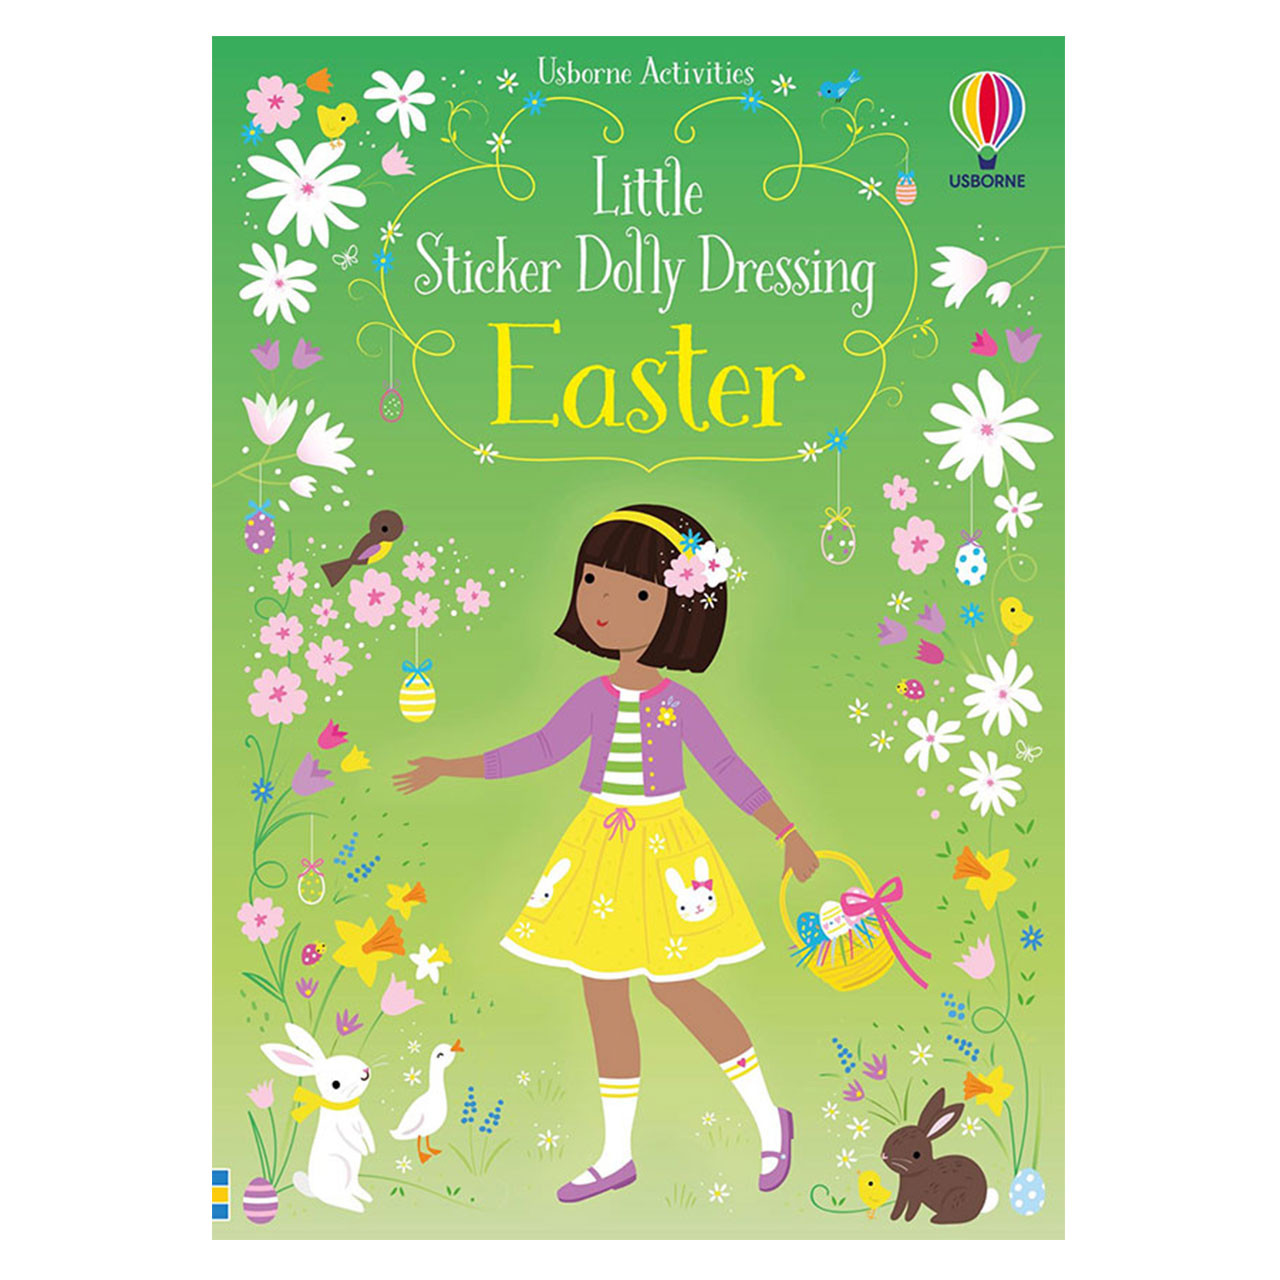 Little Stickers Dolly Dressing Easter